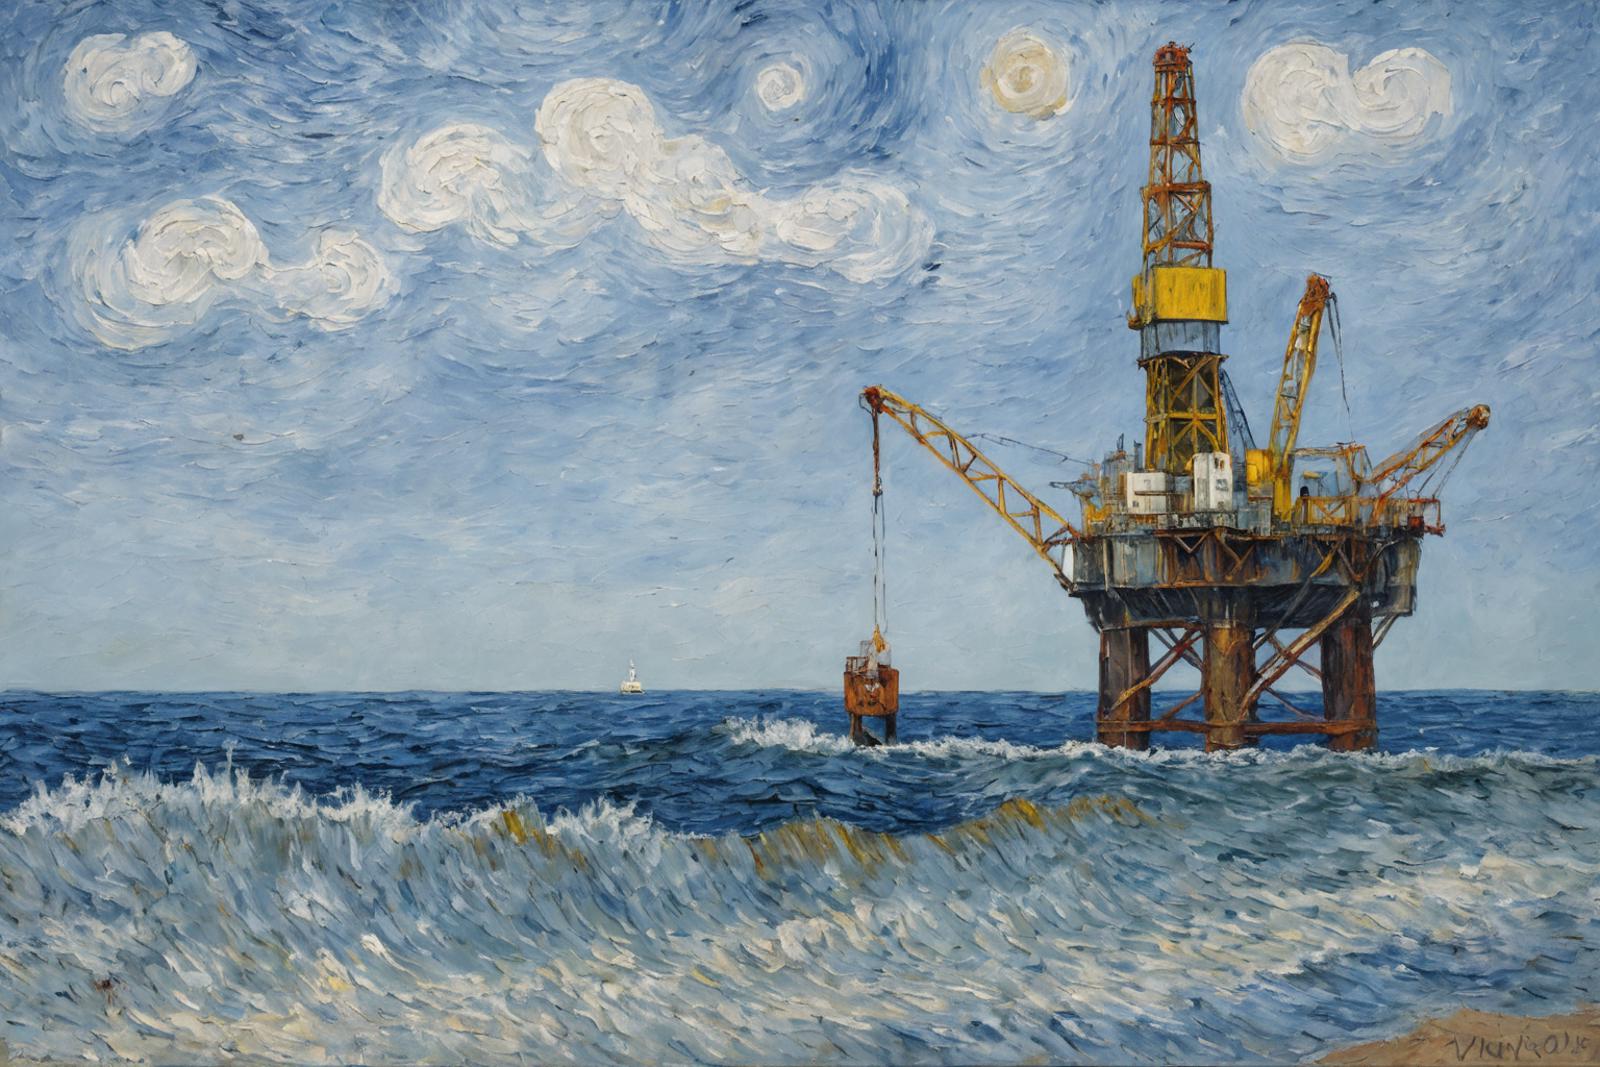 Oil Rig on a Painting of a Wavy Sea with a Boat in the Background